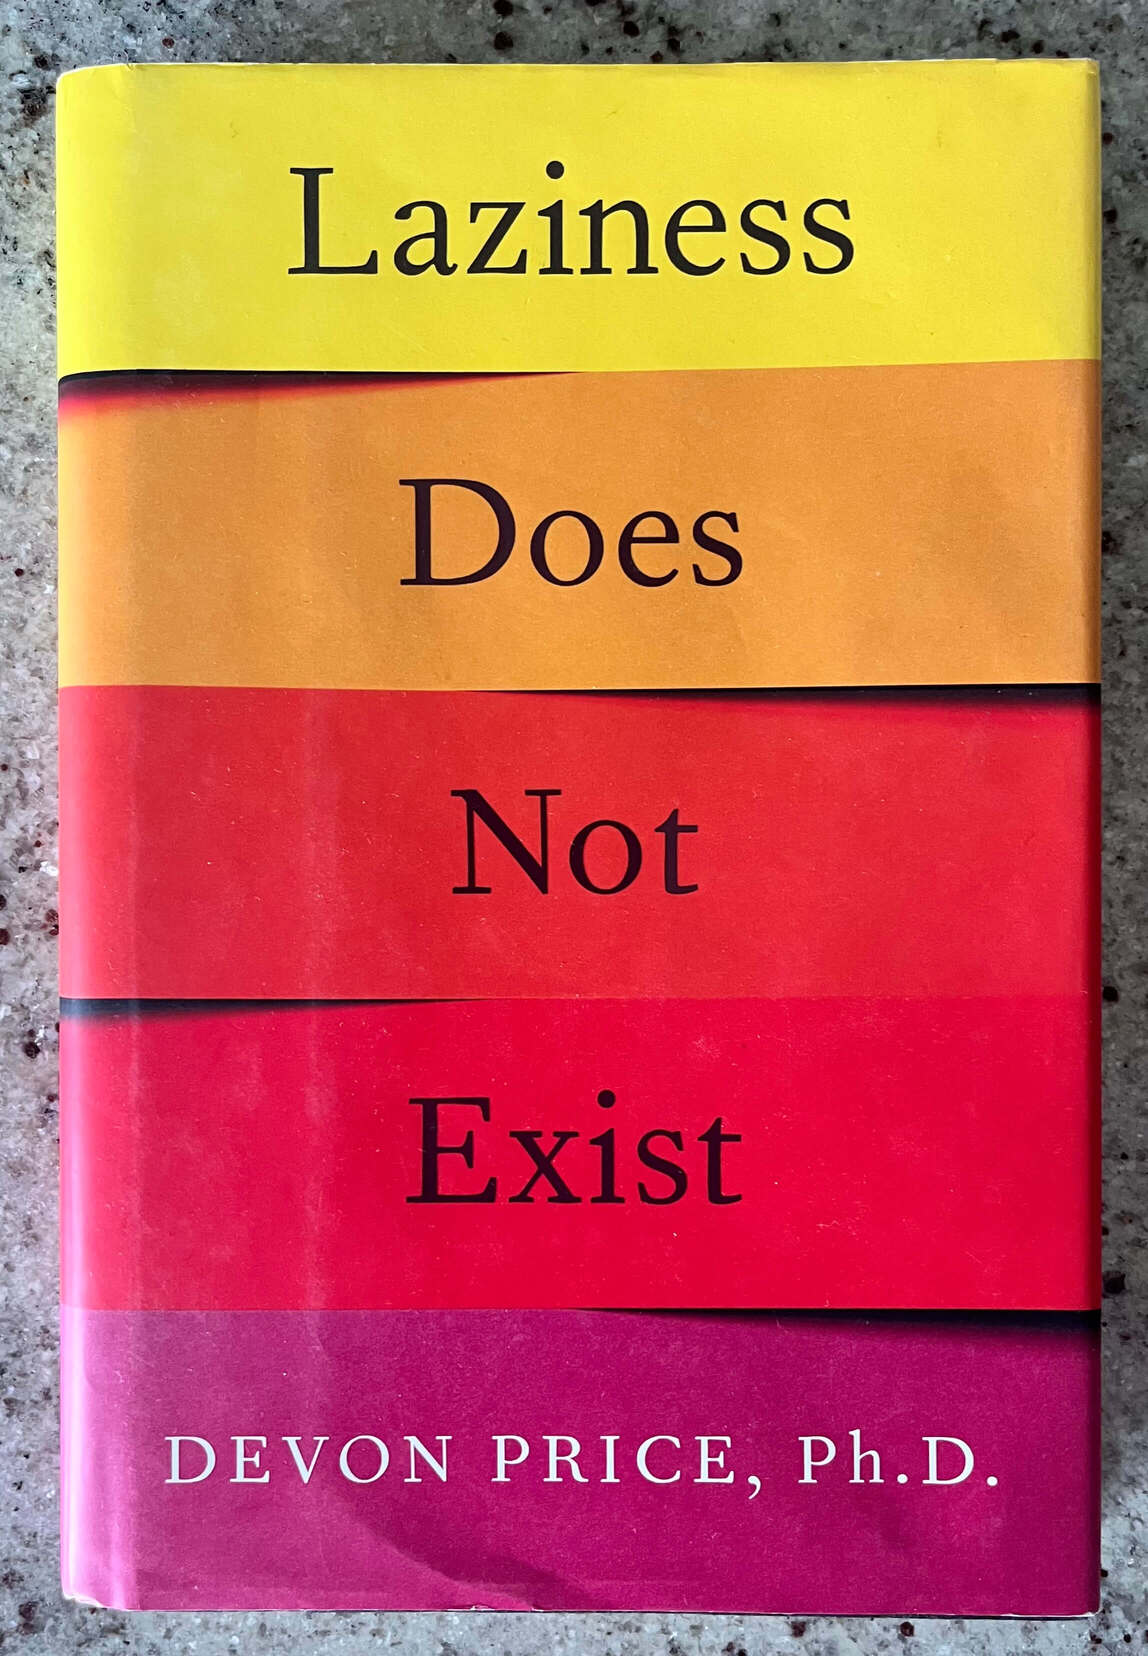 “Laziness Does Not Exist” by Devon Price, Ph.D.